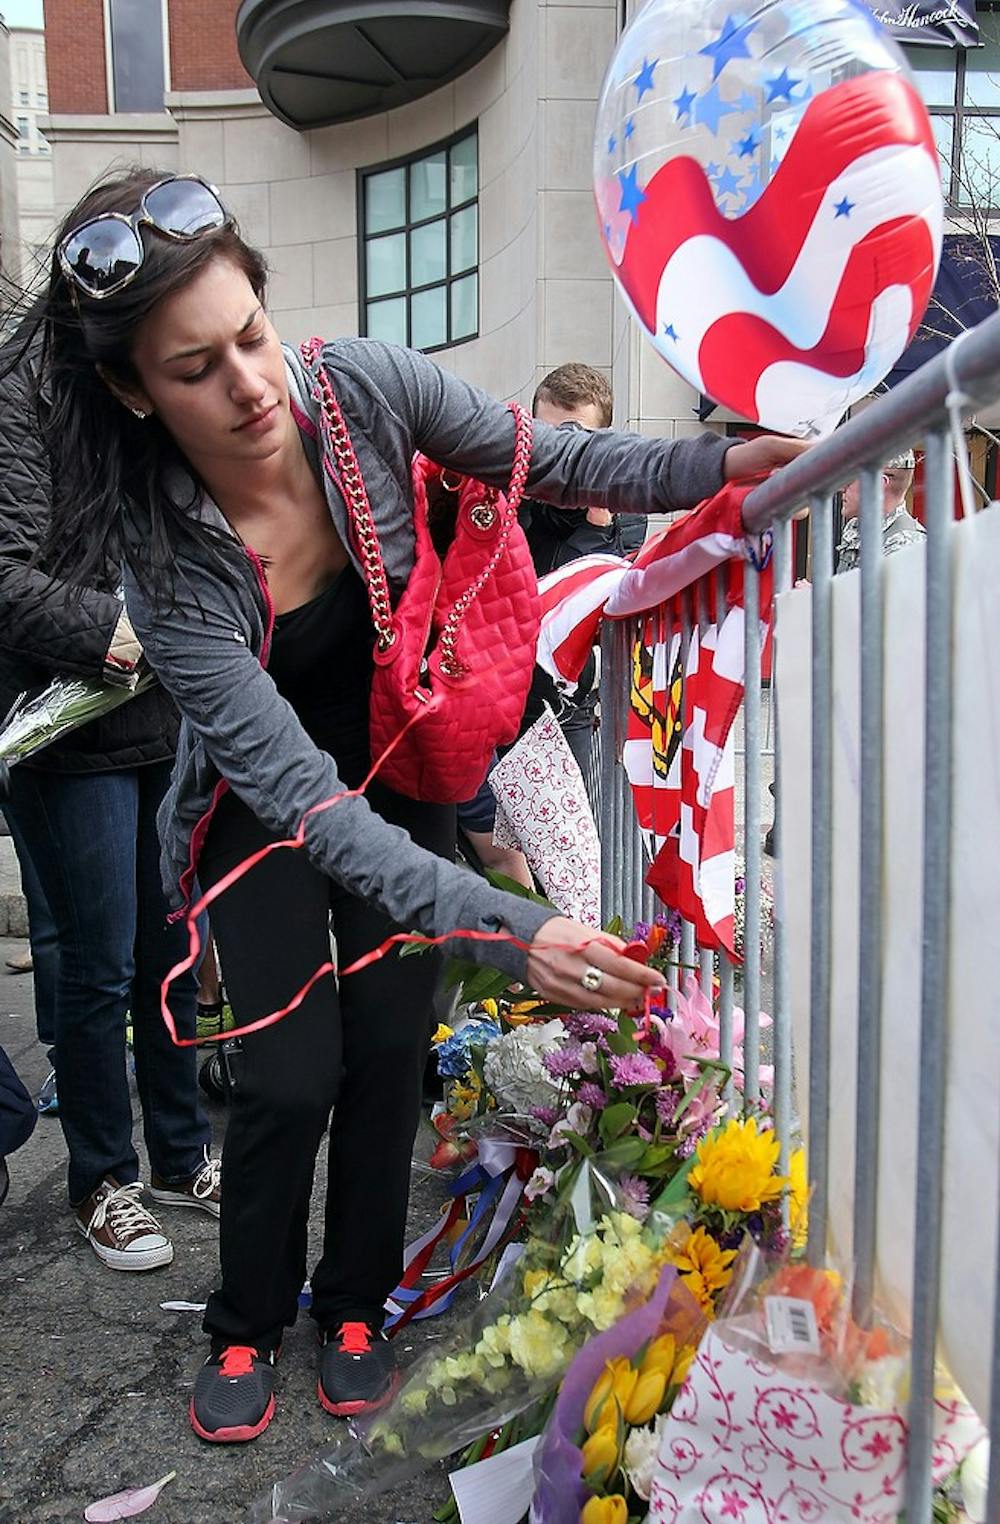 	<p>Isabelle Atkinson places a balloon and flowers at a makeshift memorial near the bombing site on Tuesday,  April 16, 2013, in Boston, Massachusetts. The city is in mourning today for three killed and at least 144 wounded in the bombing at the Boston Marathon. (Matt Stone/Boston Herald/MCT)</p>